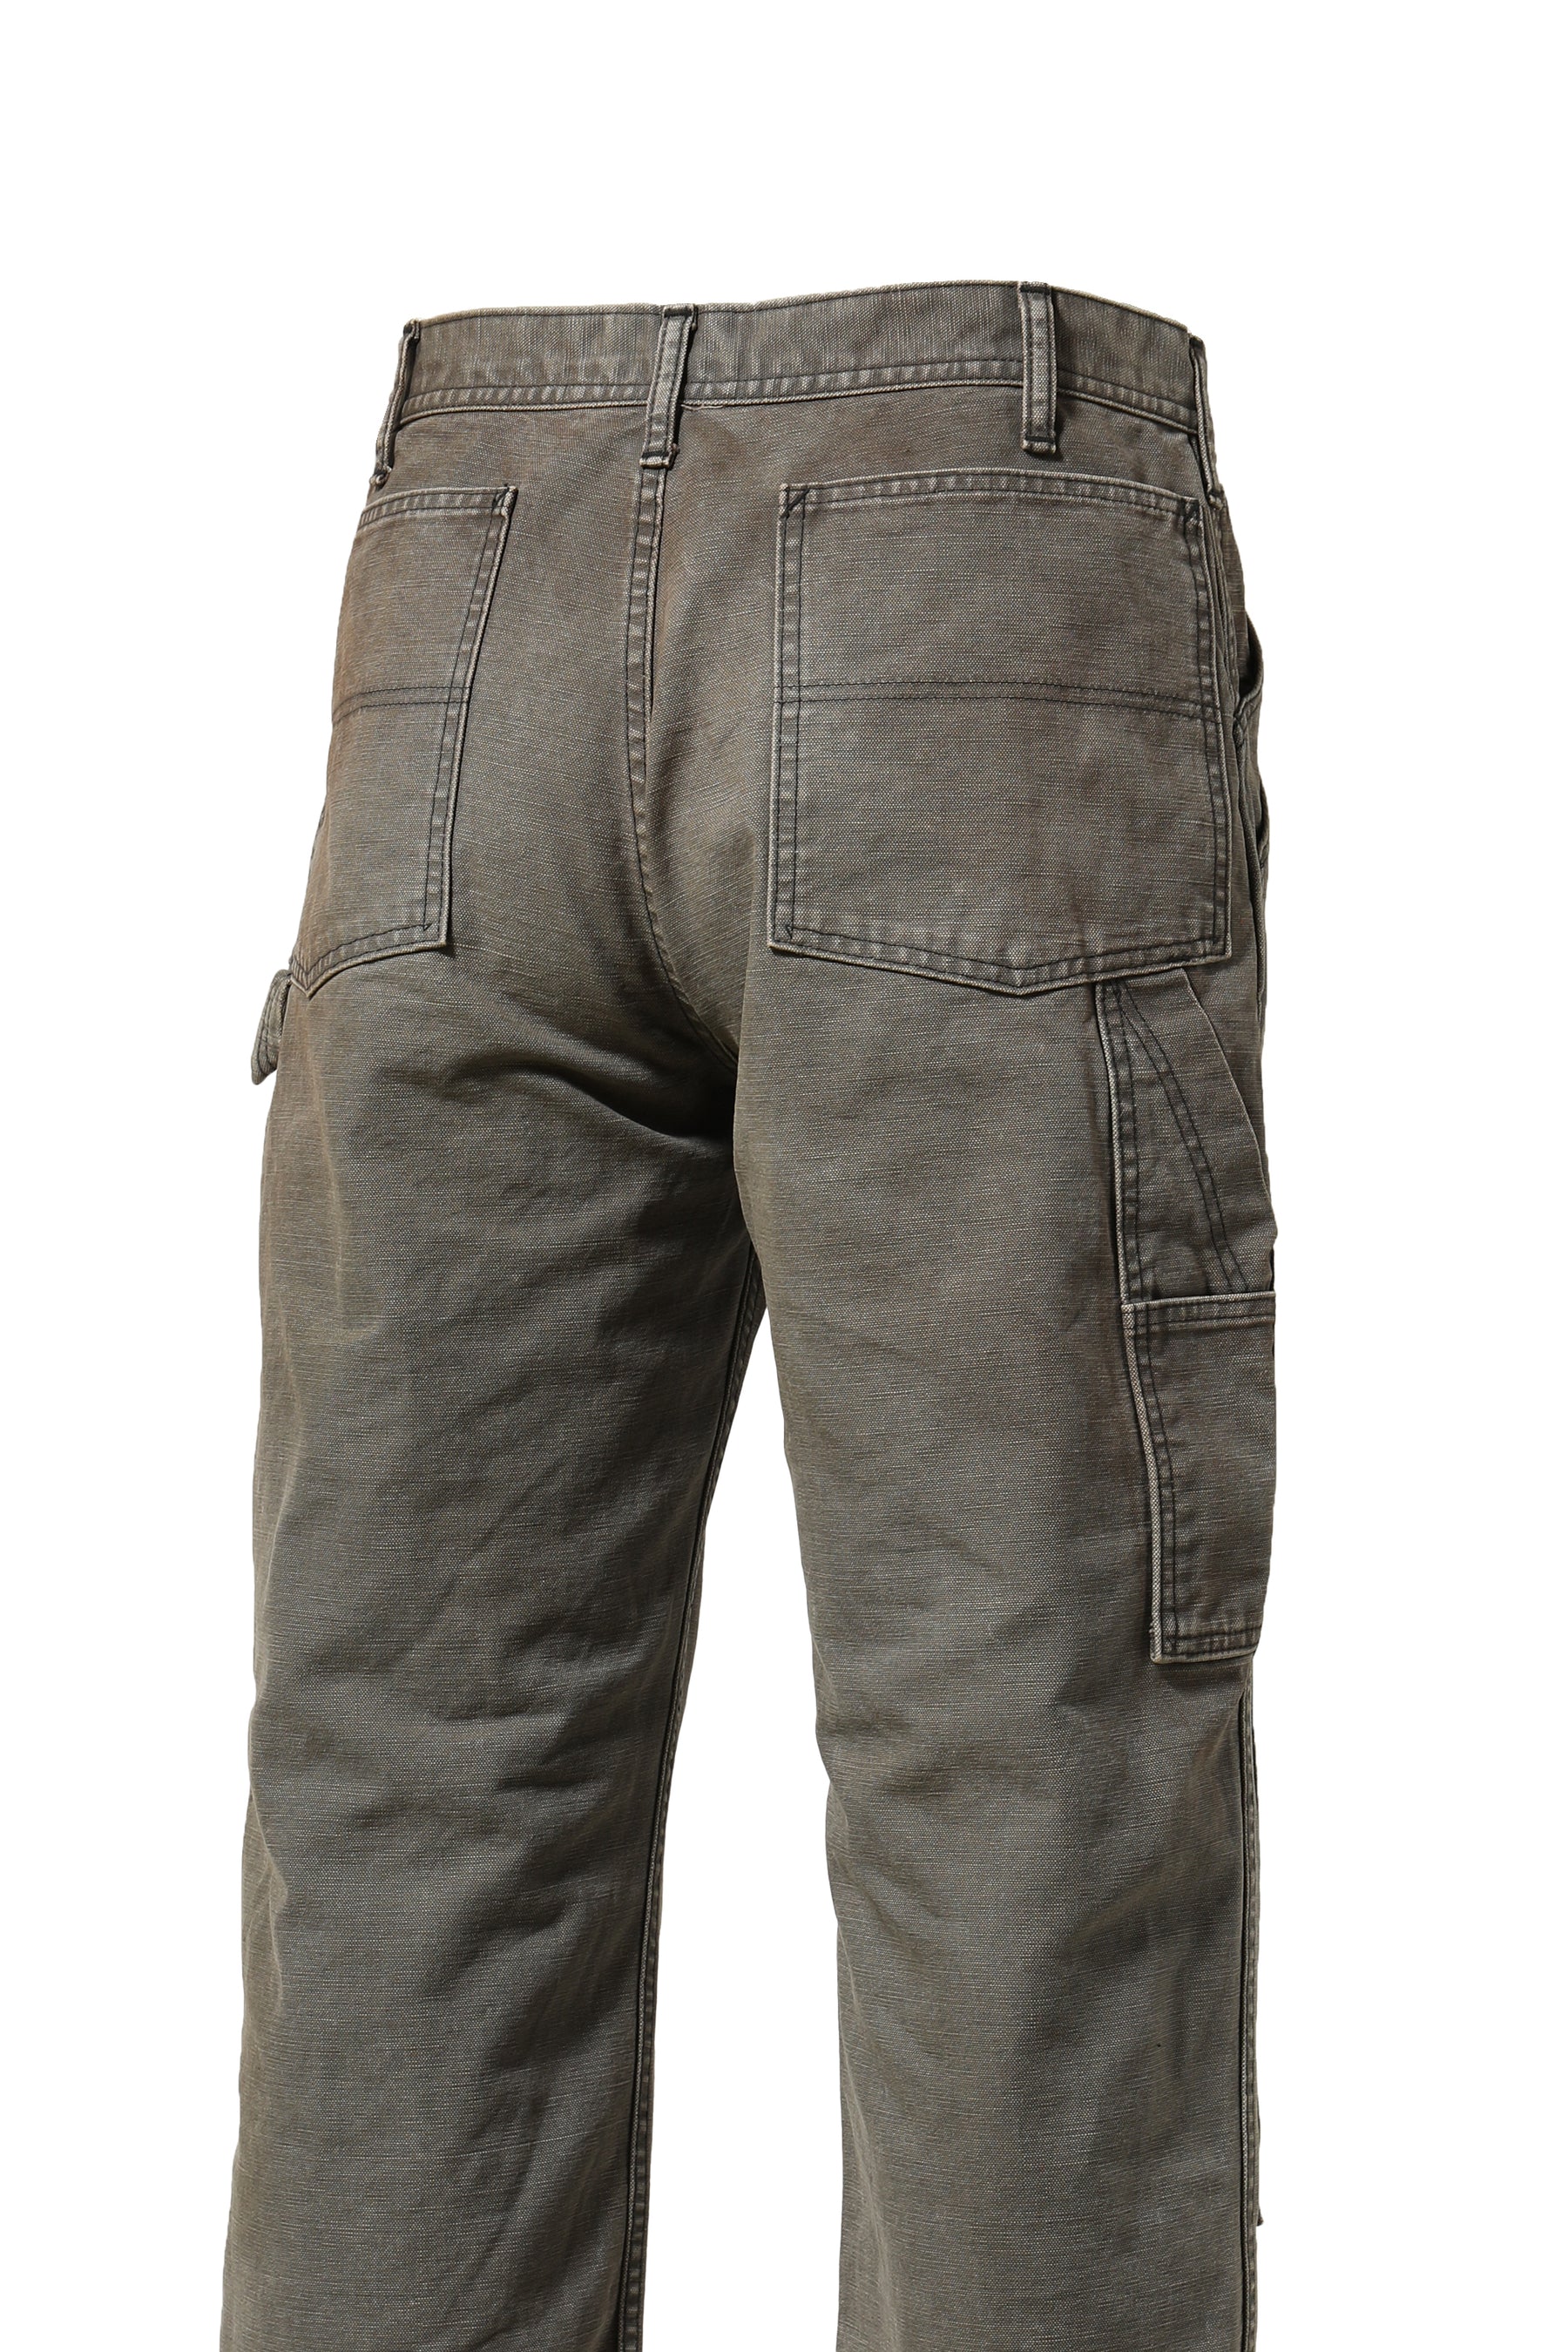 DOUBLE KNEE DUCK PAINTER PANTS AGEING (EXCLUSIVE) / OLIVE AGEING